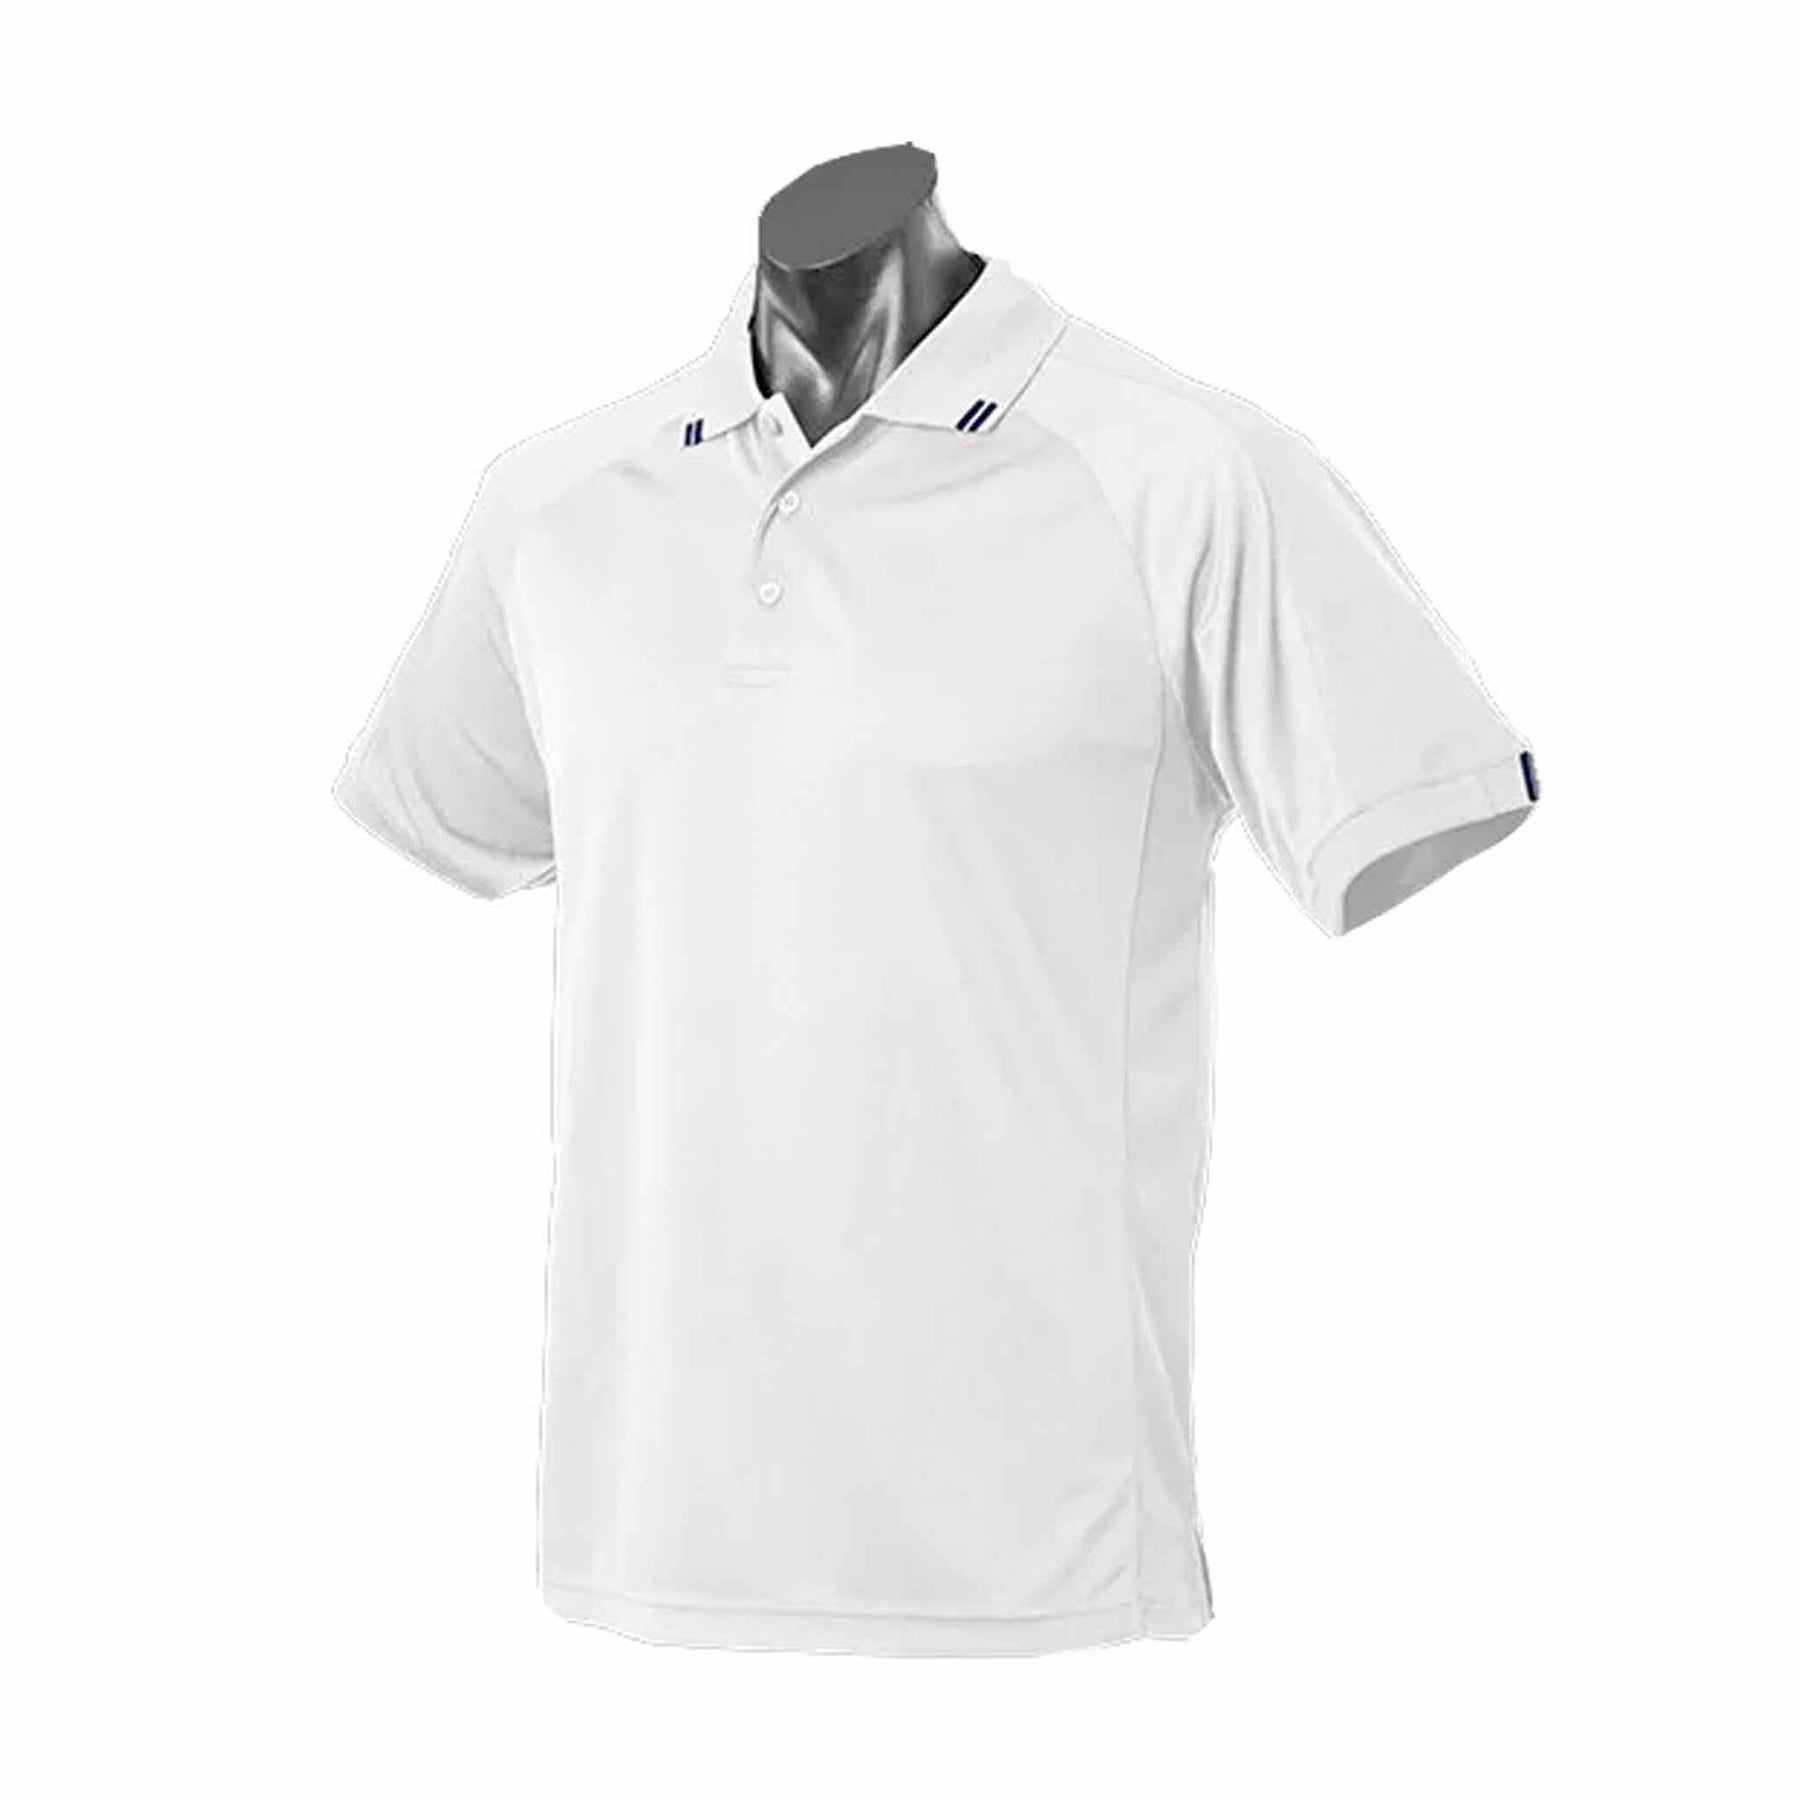 aussie pacific flinders polo in white navy